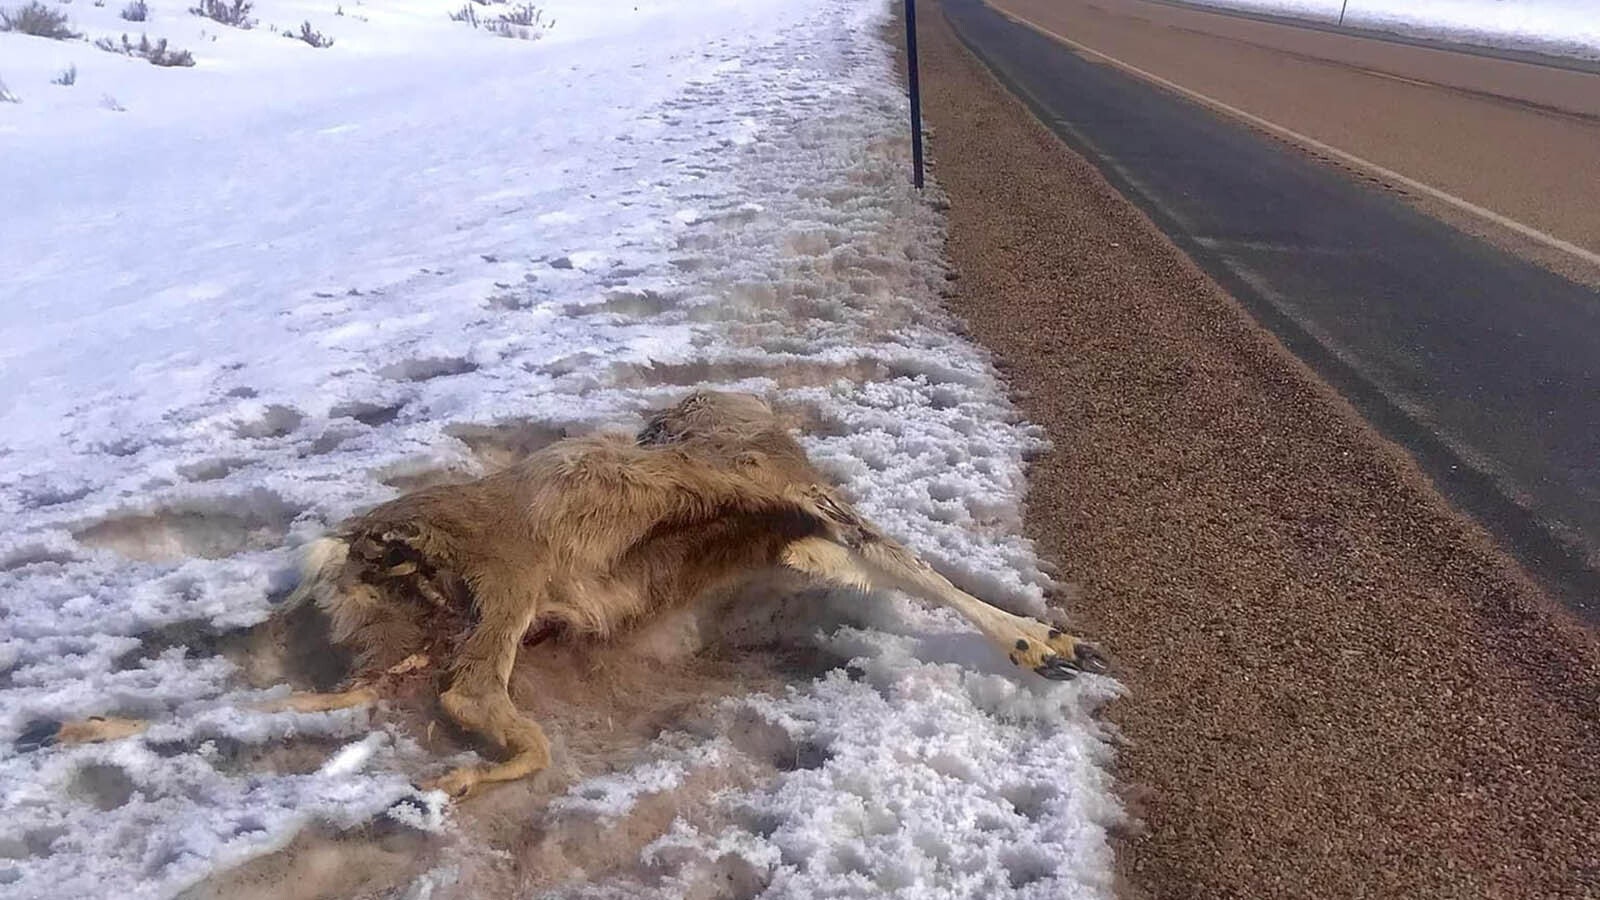 This deer, stuck and killed along Highway 189 between Interstate 80 and Kemmerer, is just one of thousands that have perished there over the years.